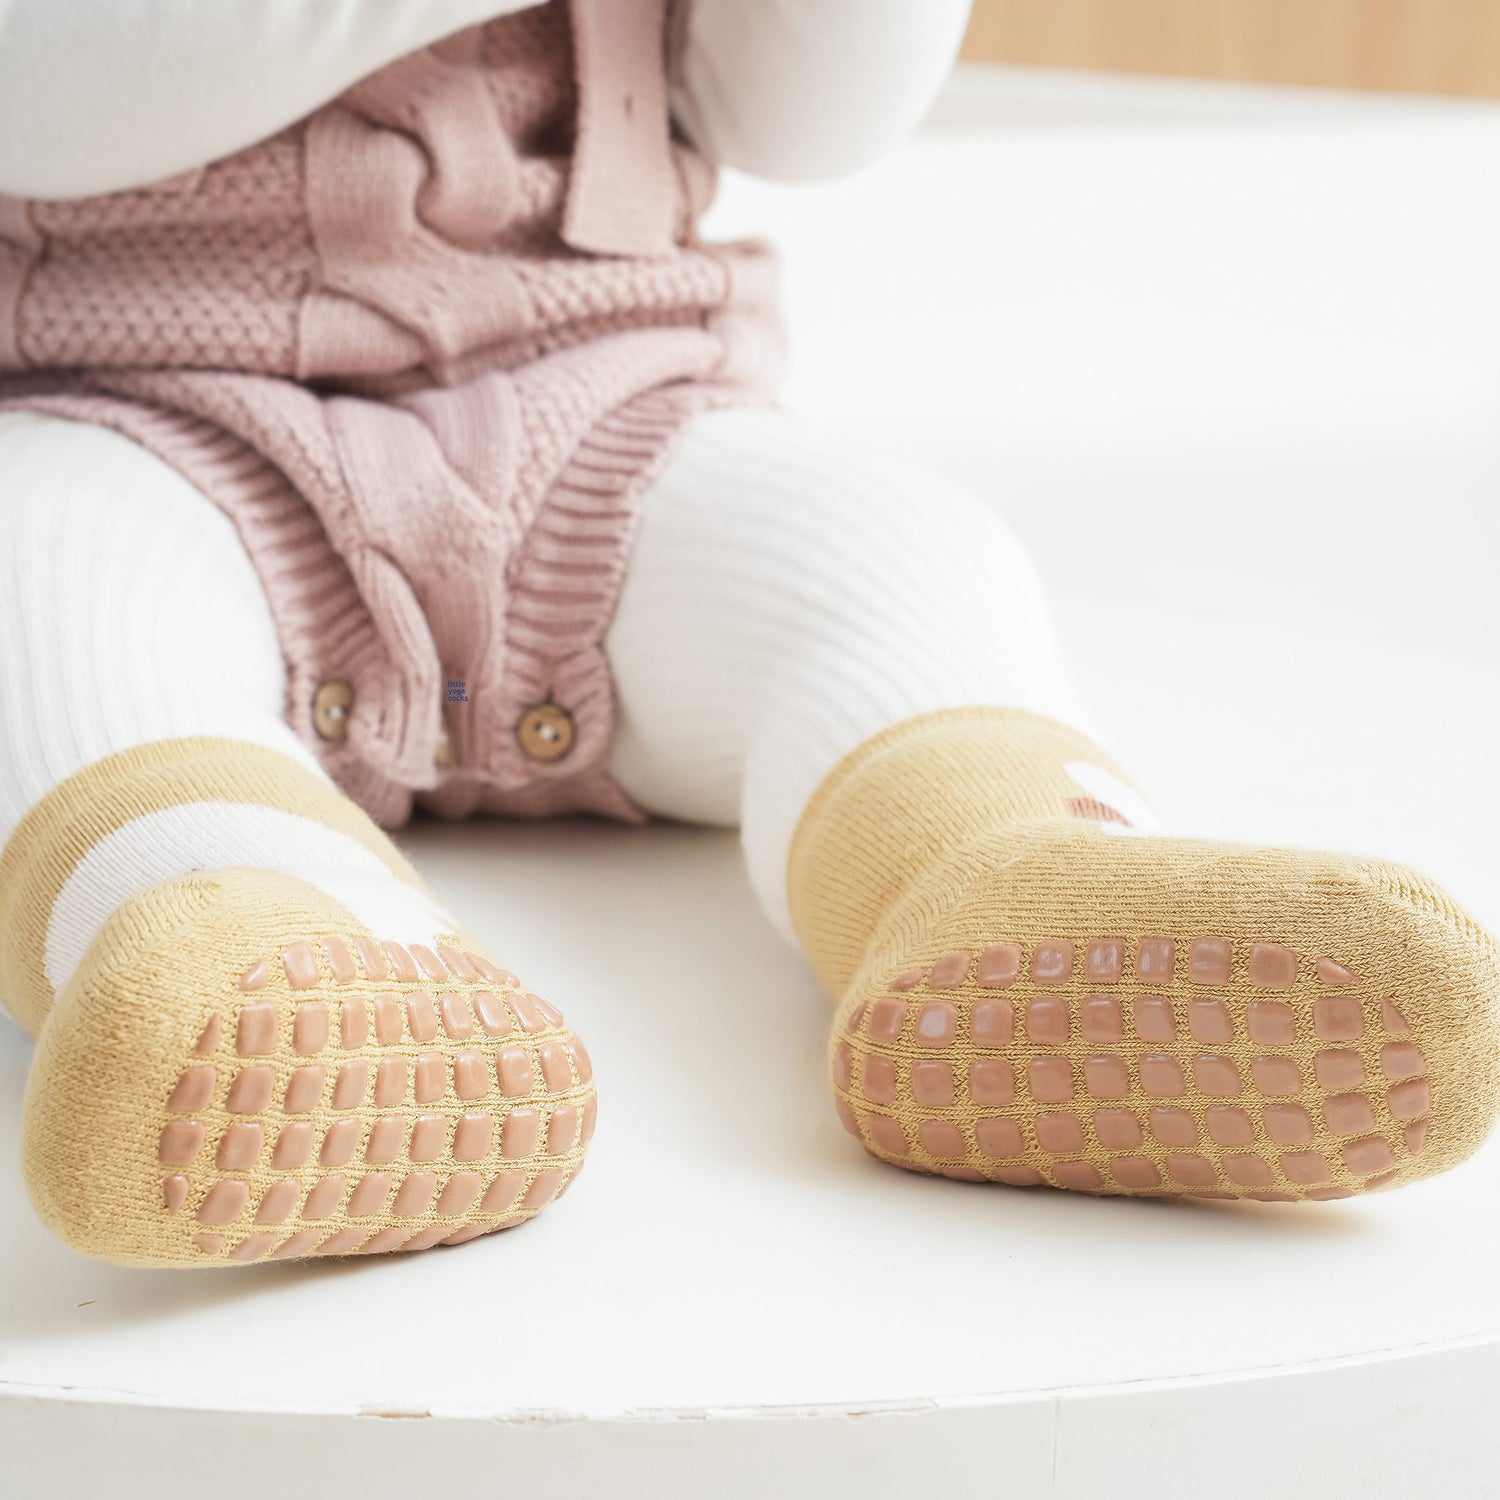 Cute low-cut socks with anti-slip designs for toddlers.